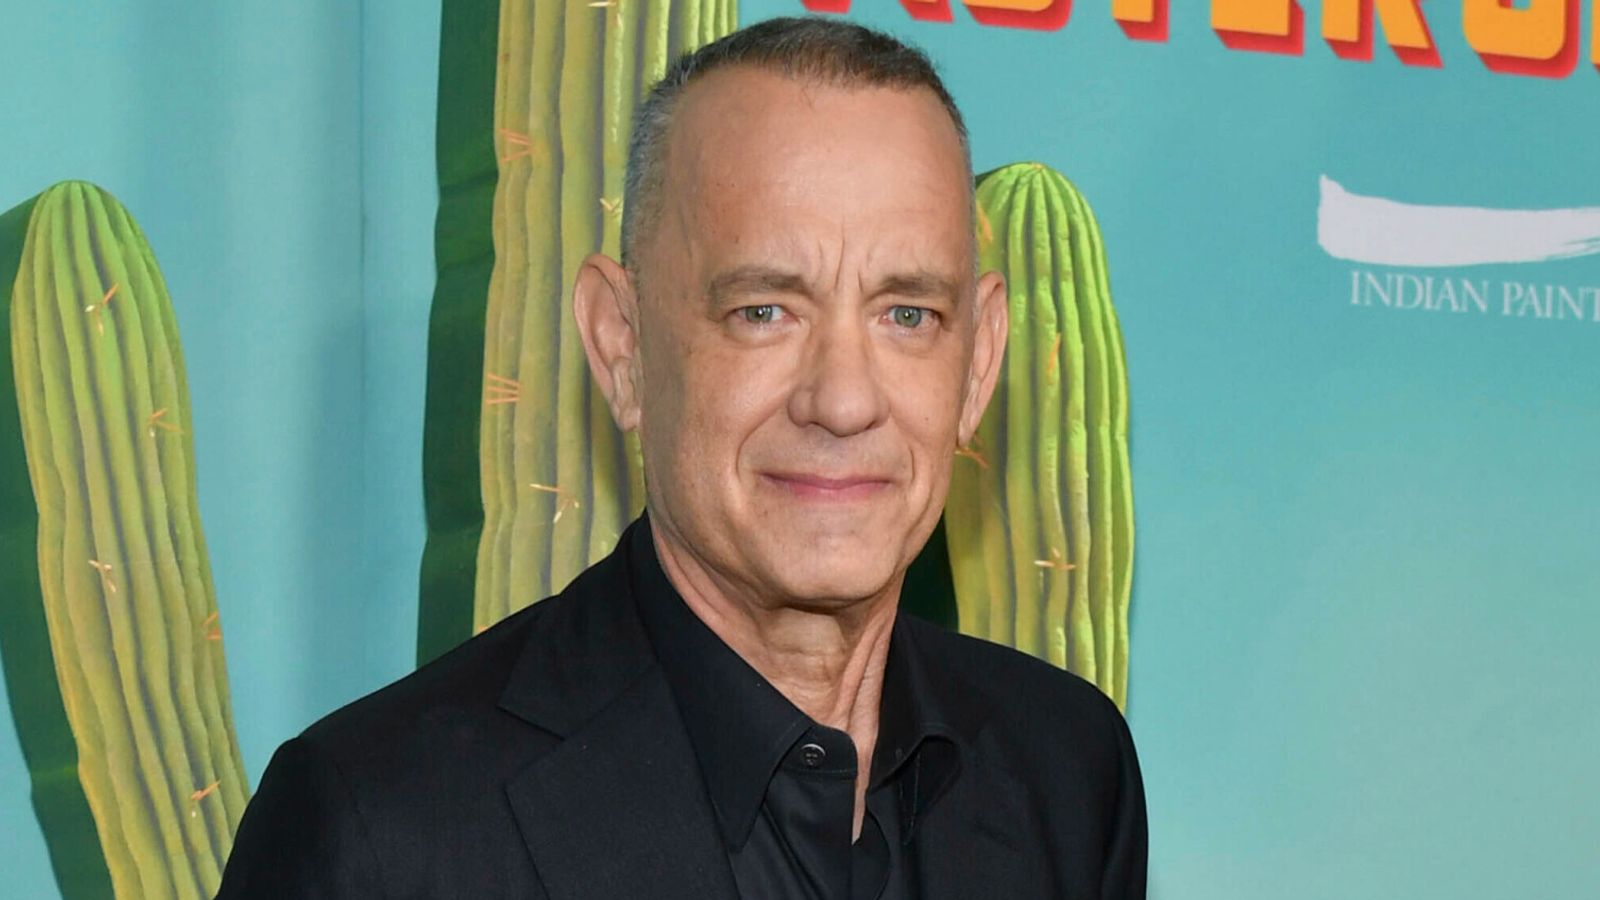 Tom Hanks warns fans not to fall for deepfake advert using his face